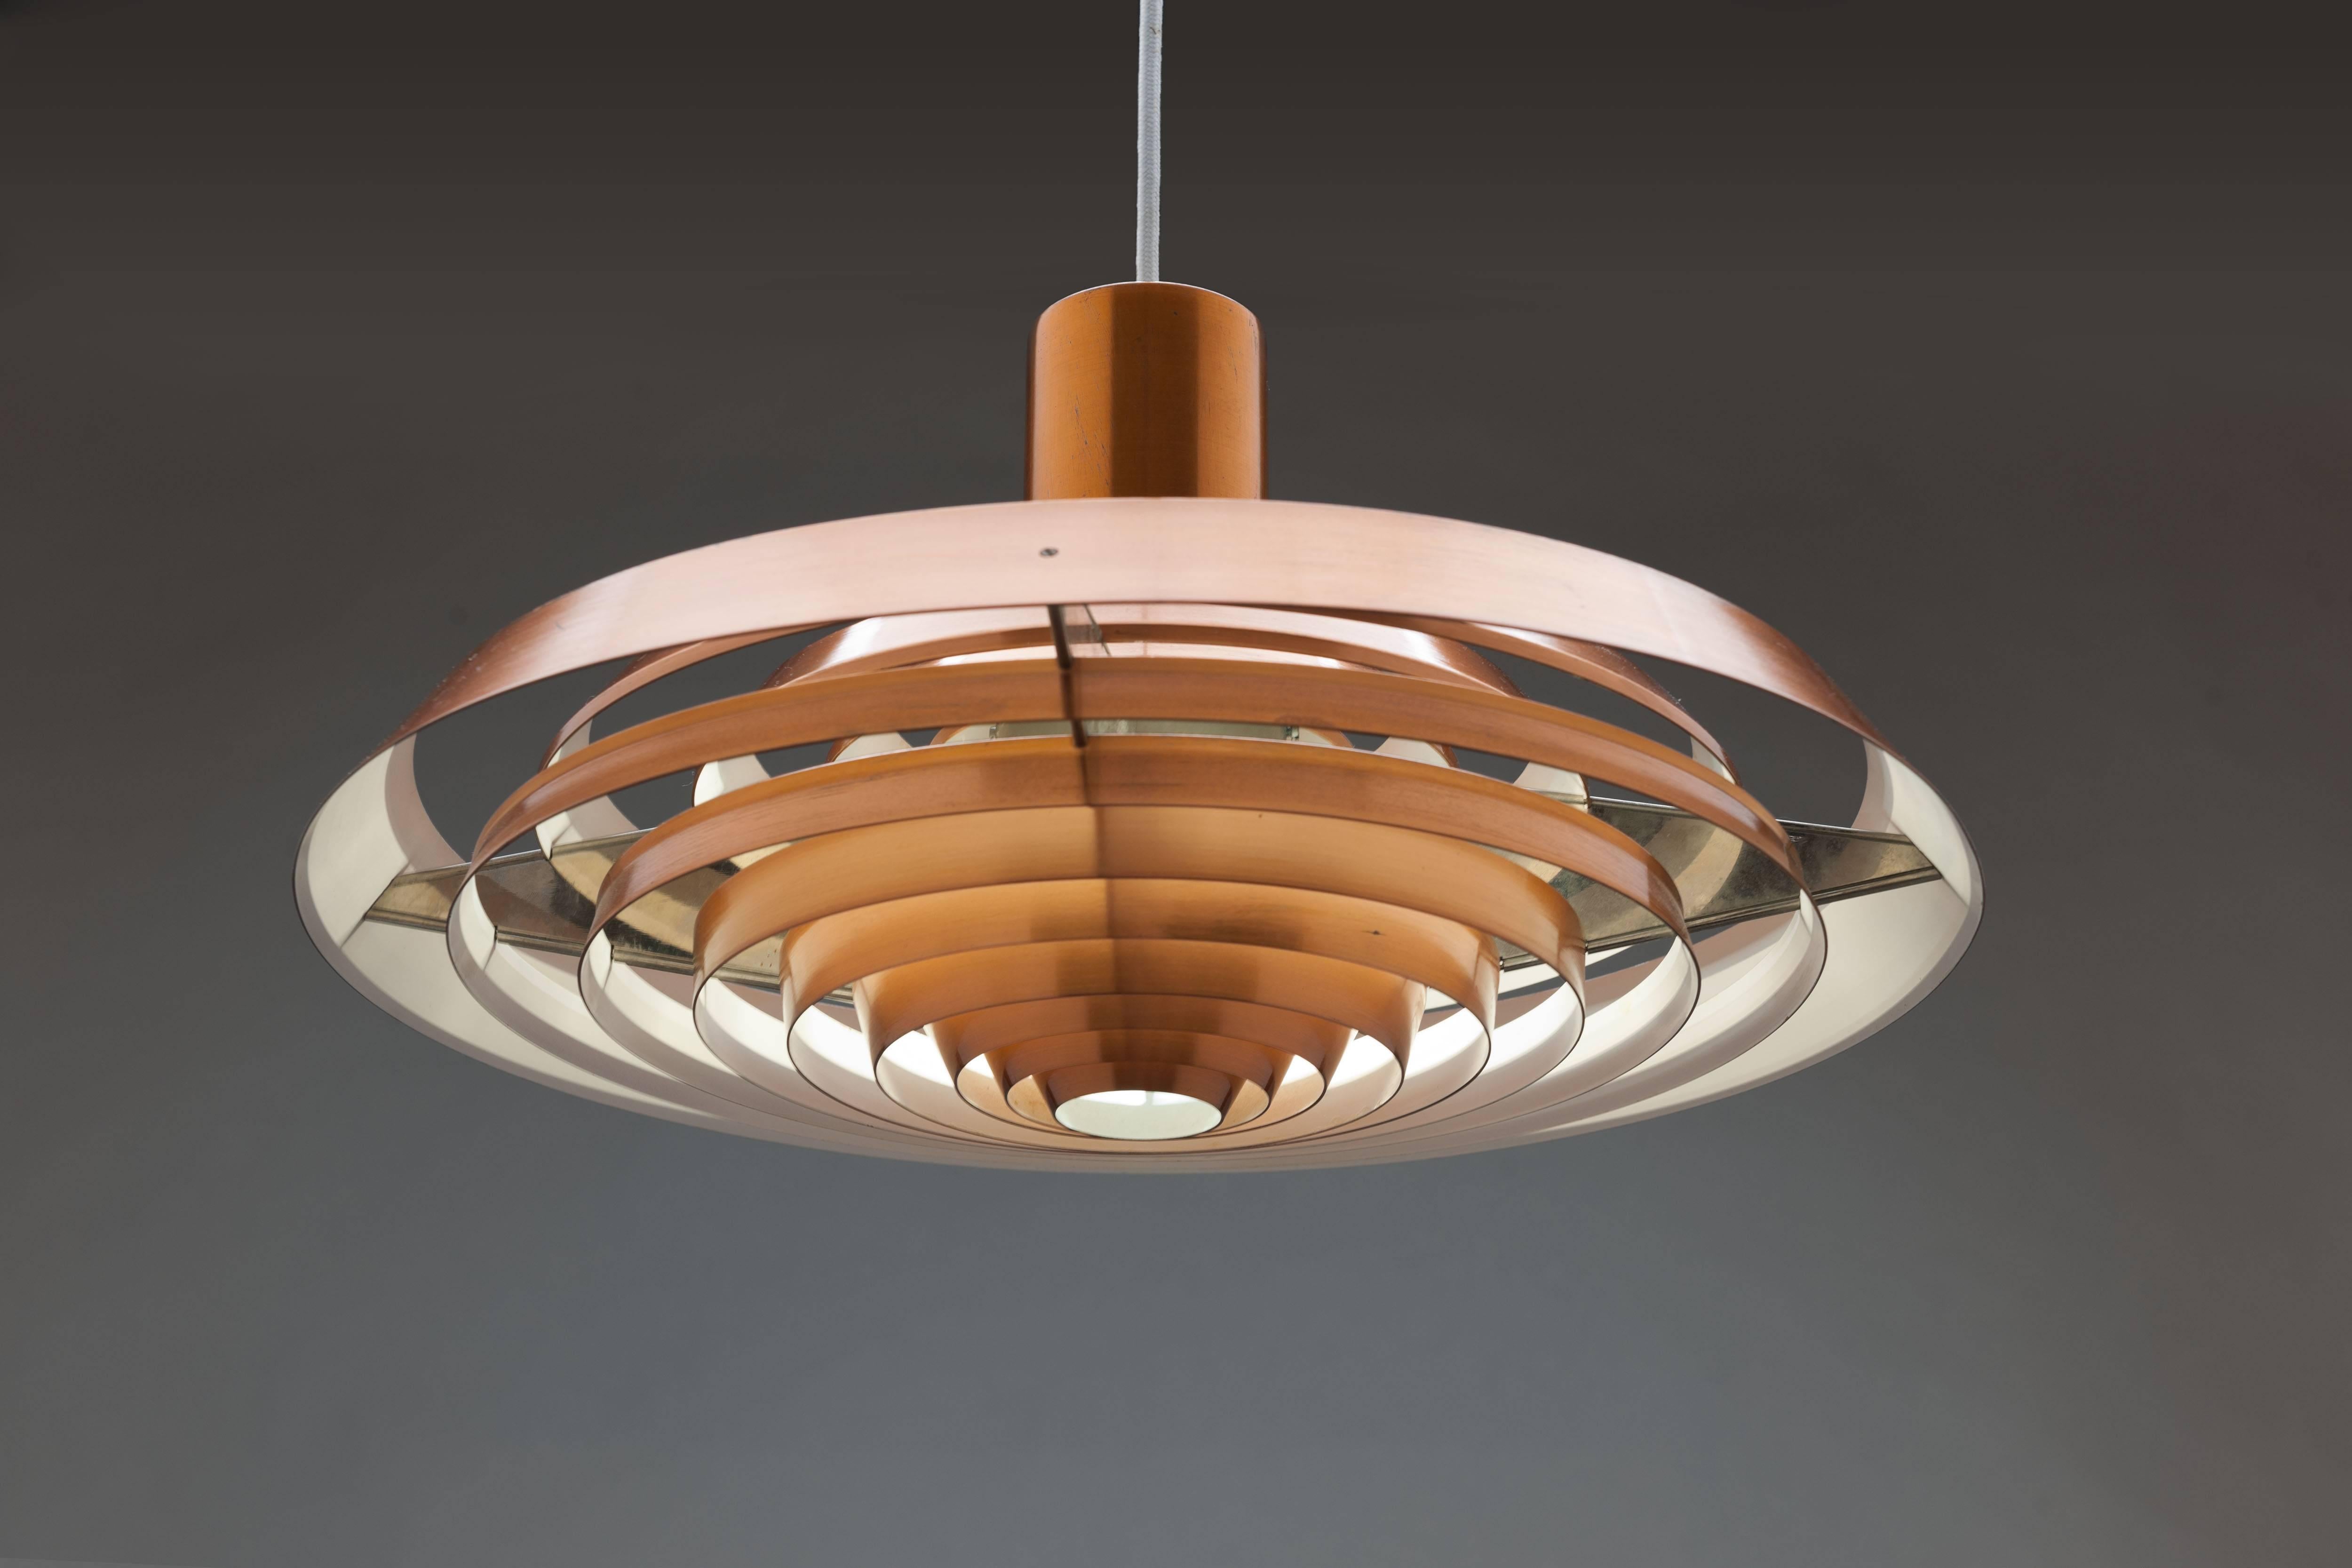 Copper Langelinie plate pendant by Poul Henningsen for Louis Poulsen originally designed in 1958 for the Langelinie Pavilion in Copenhagen and inspired by the pattern of rings in the water surrounding the Pavilion. This lamp was produced in the same